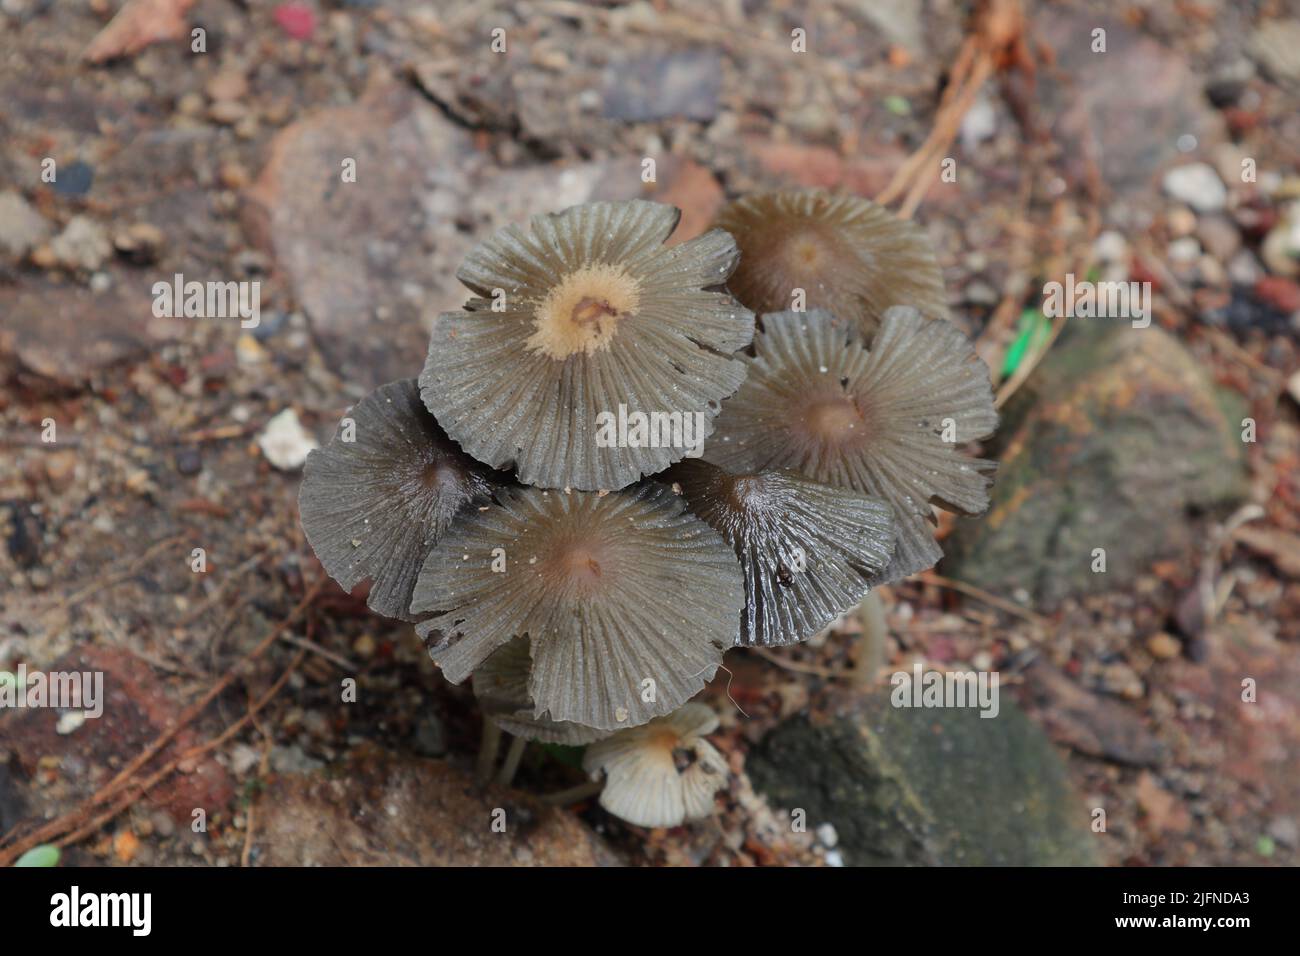 Close up of a cluster of brown color mushrooms blooms on dirty ground Stock Photo